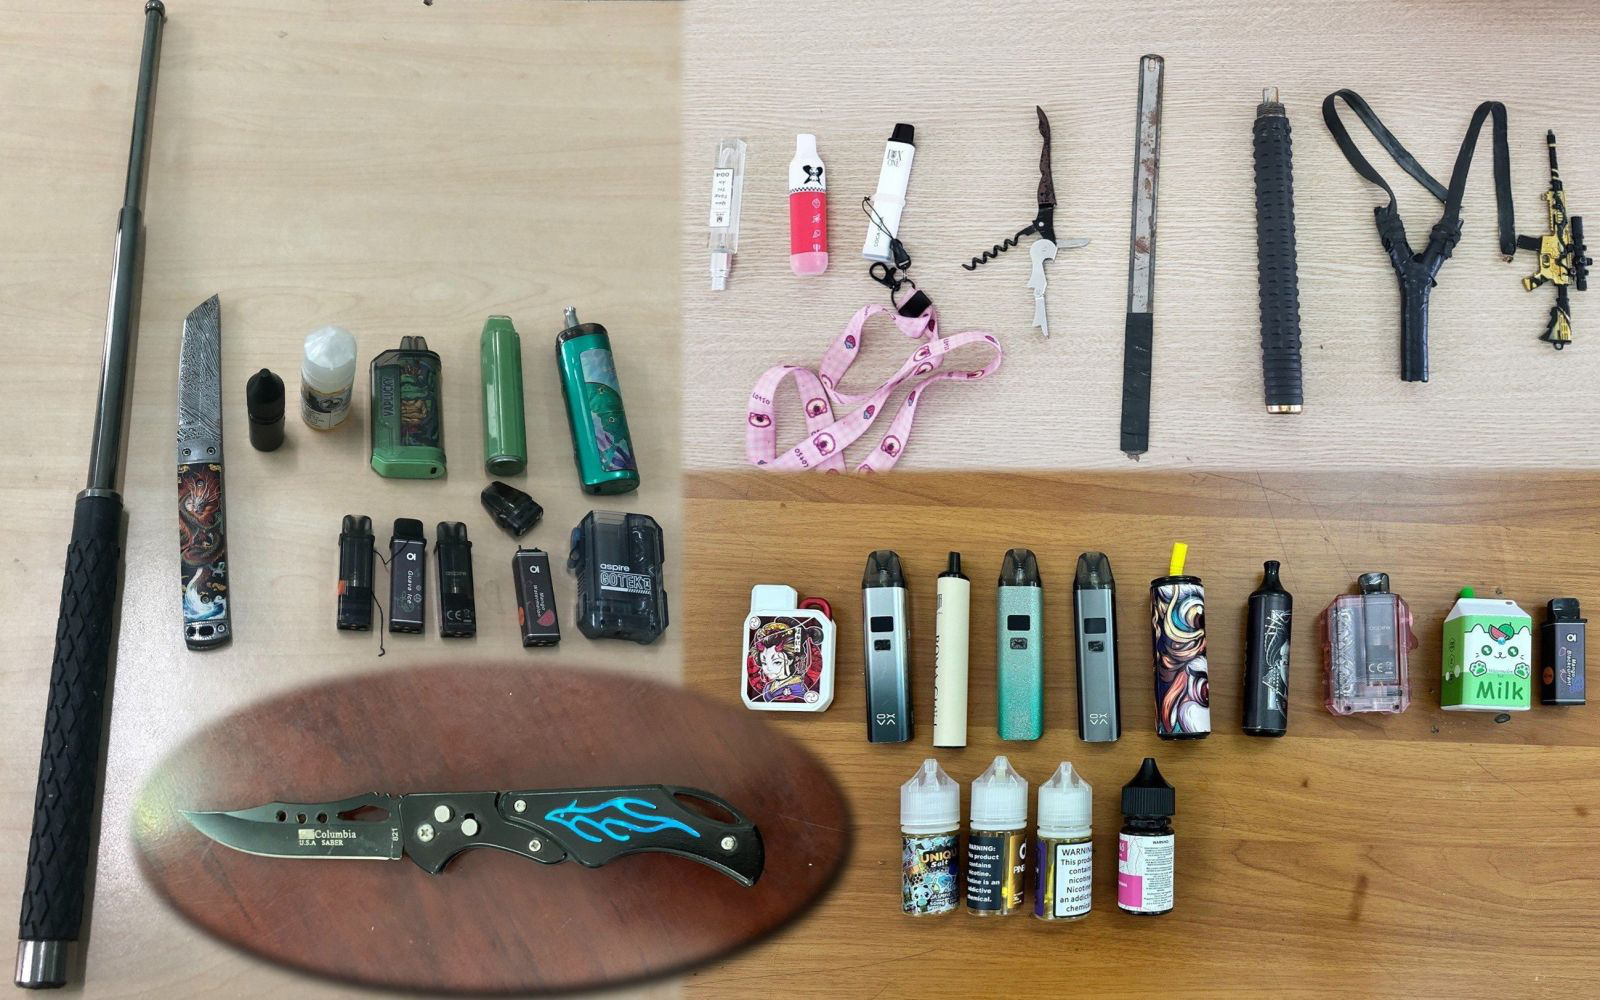 Weapons, marijuana found in K-12 students’ backpacks across north-central Vietnamese province